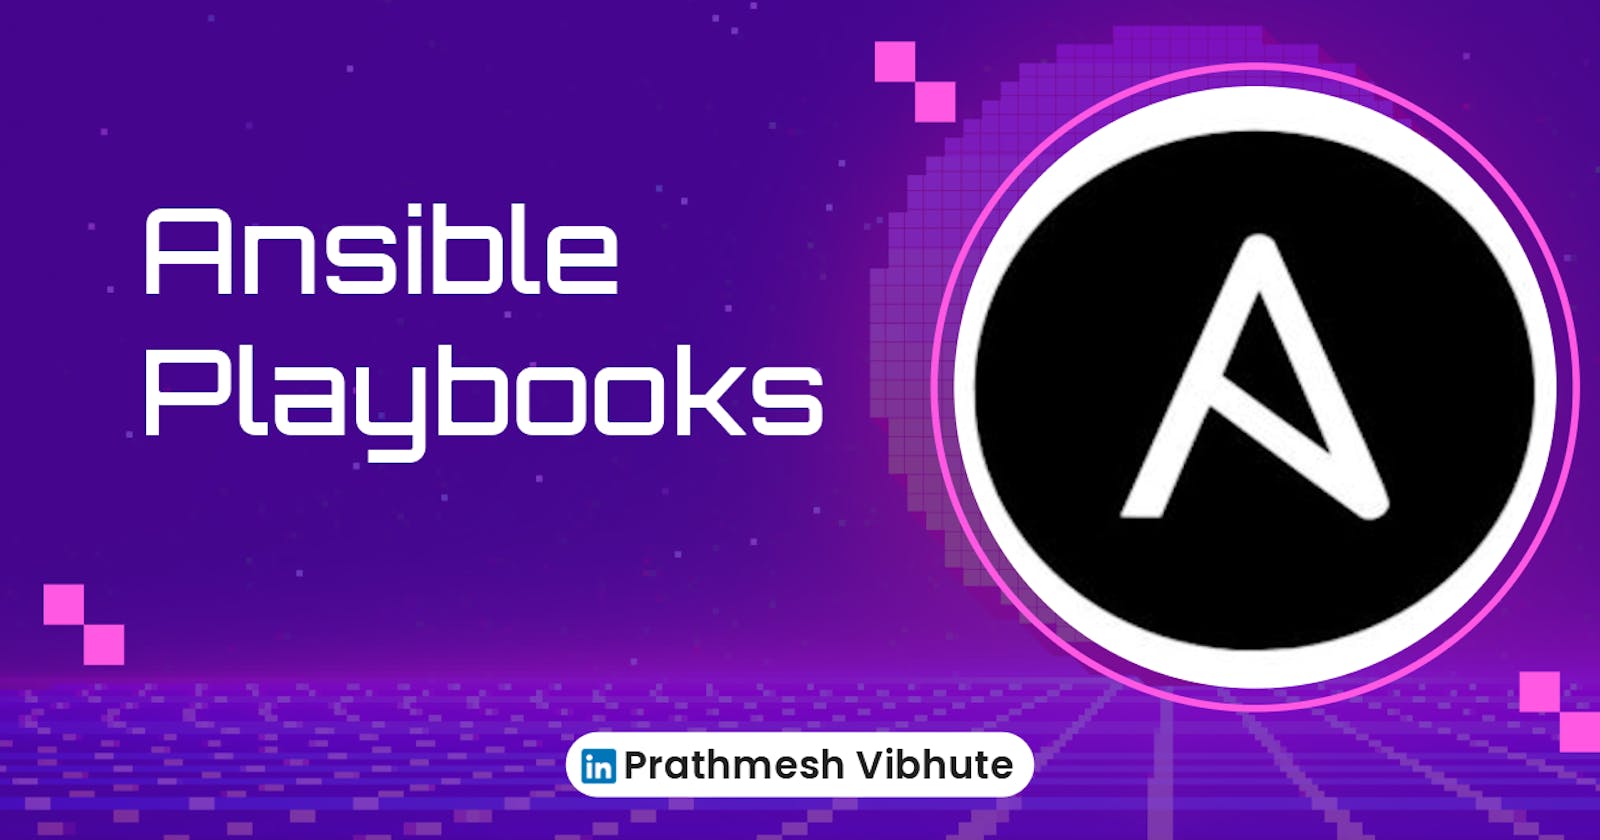 Day 58: Ansible Playbooks